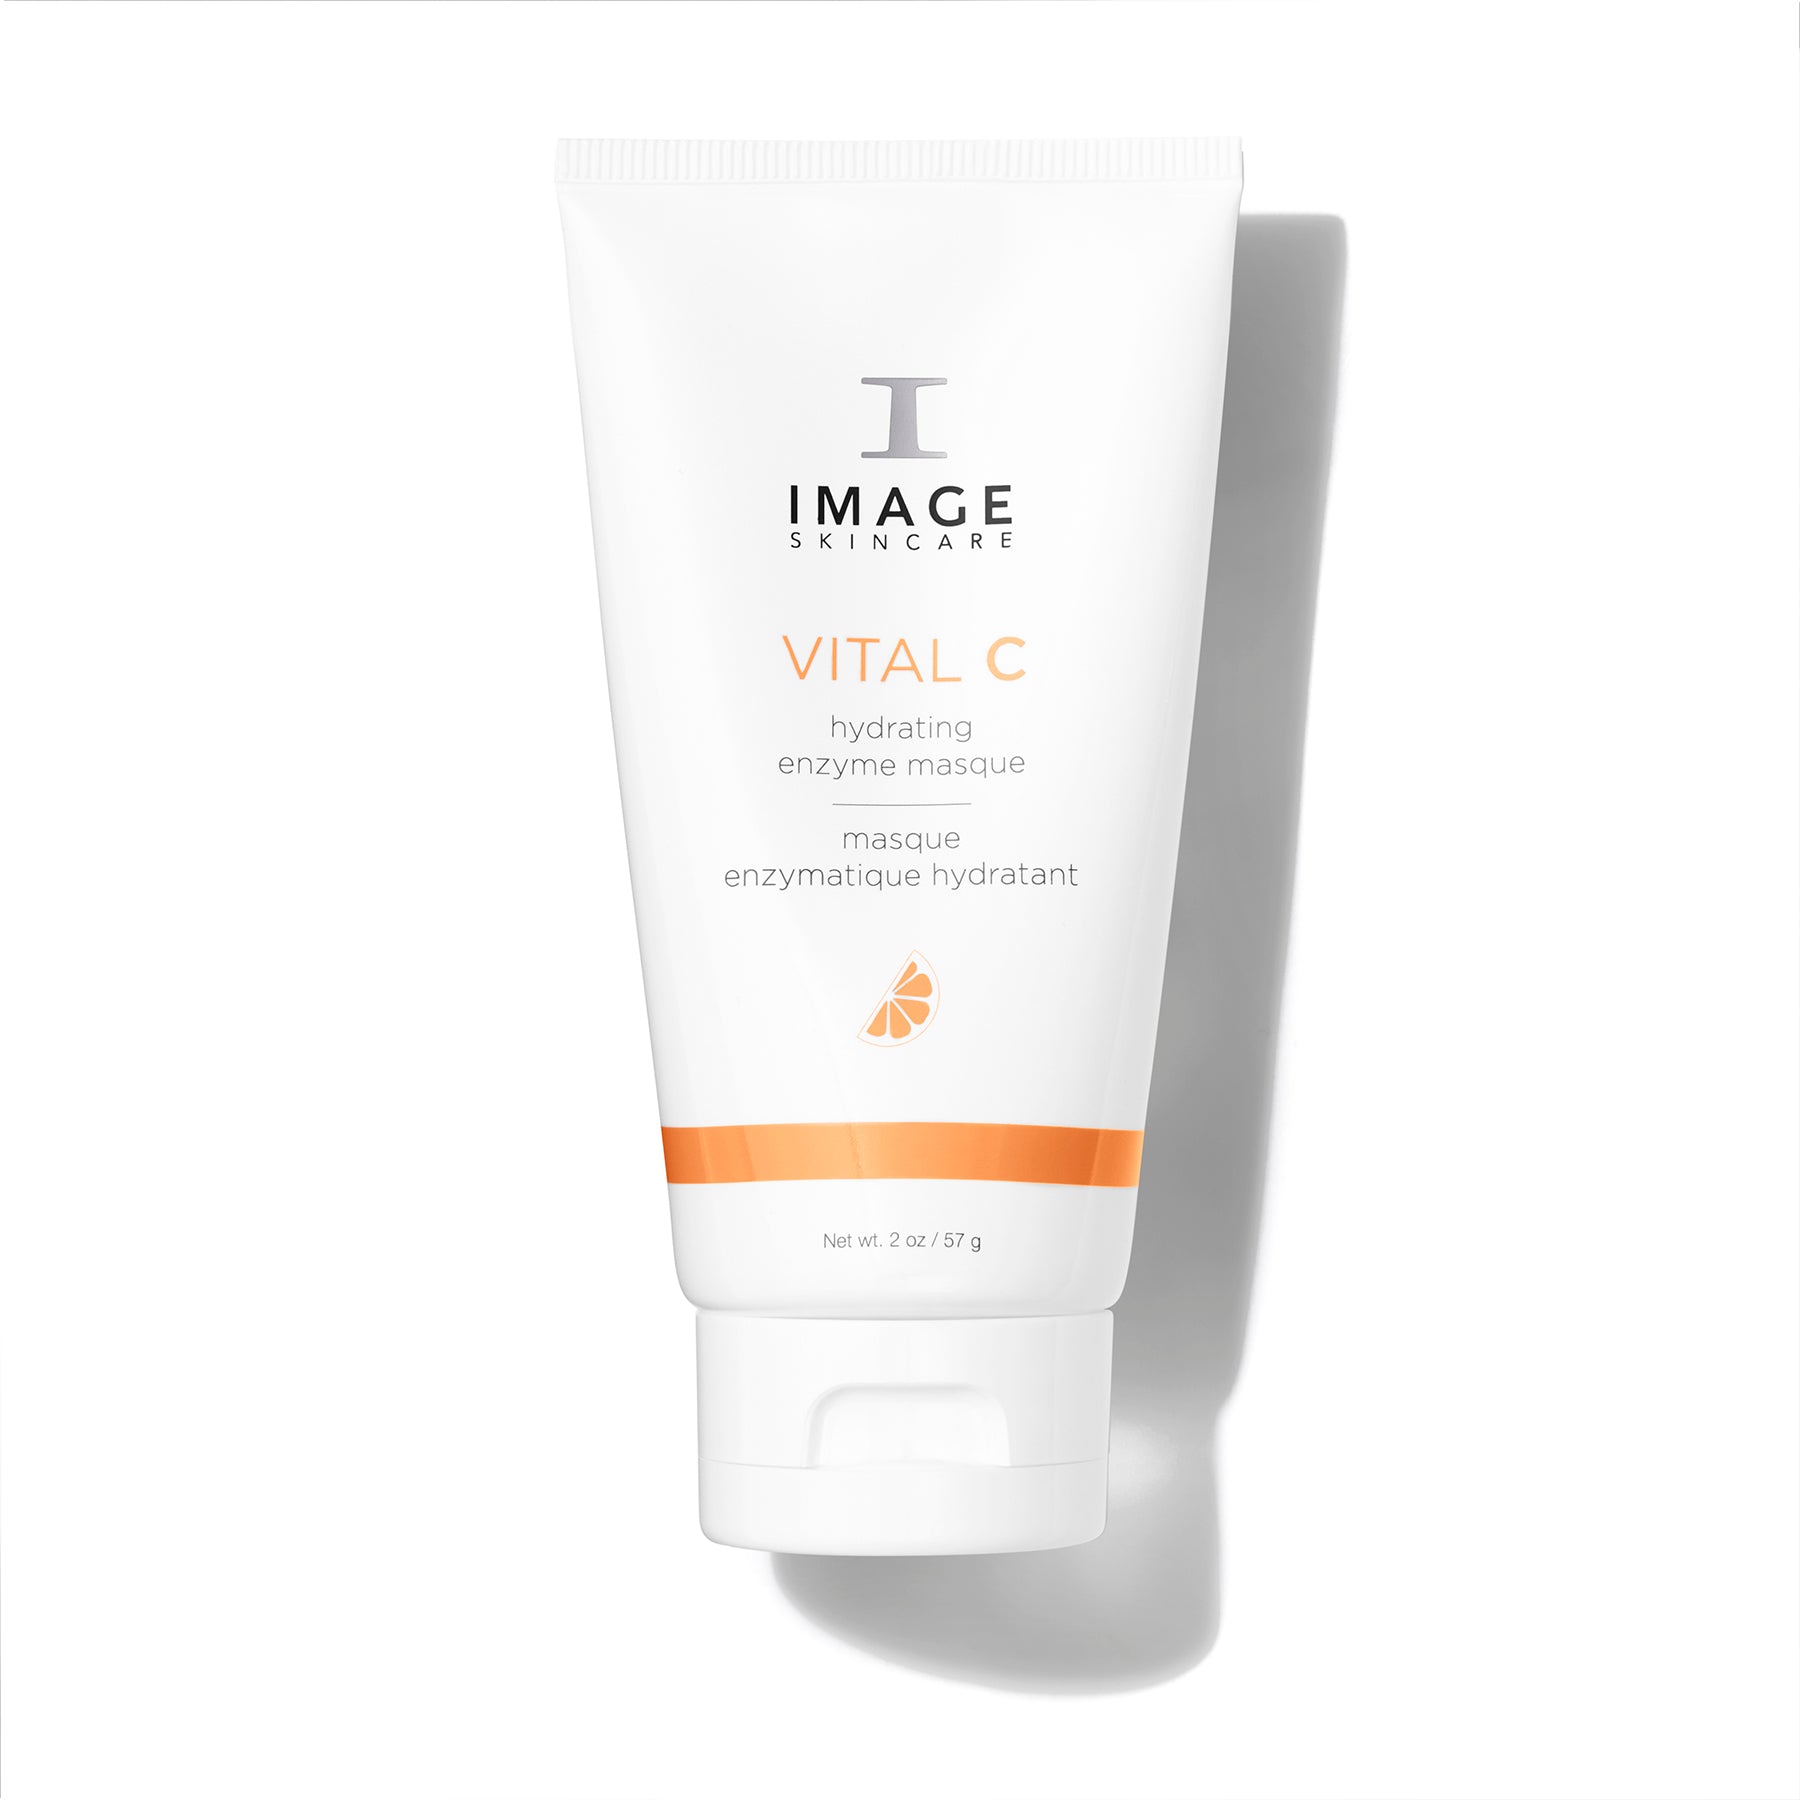 Image Skincare Vital C Hydrating Enzyme Masque Shop At Exclusive Beauty